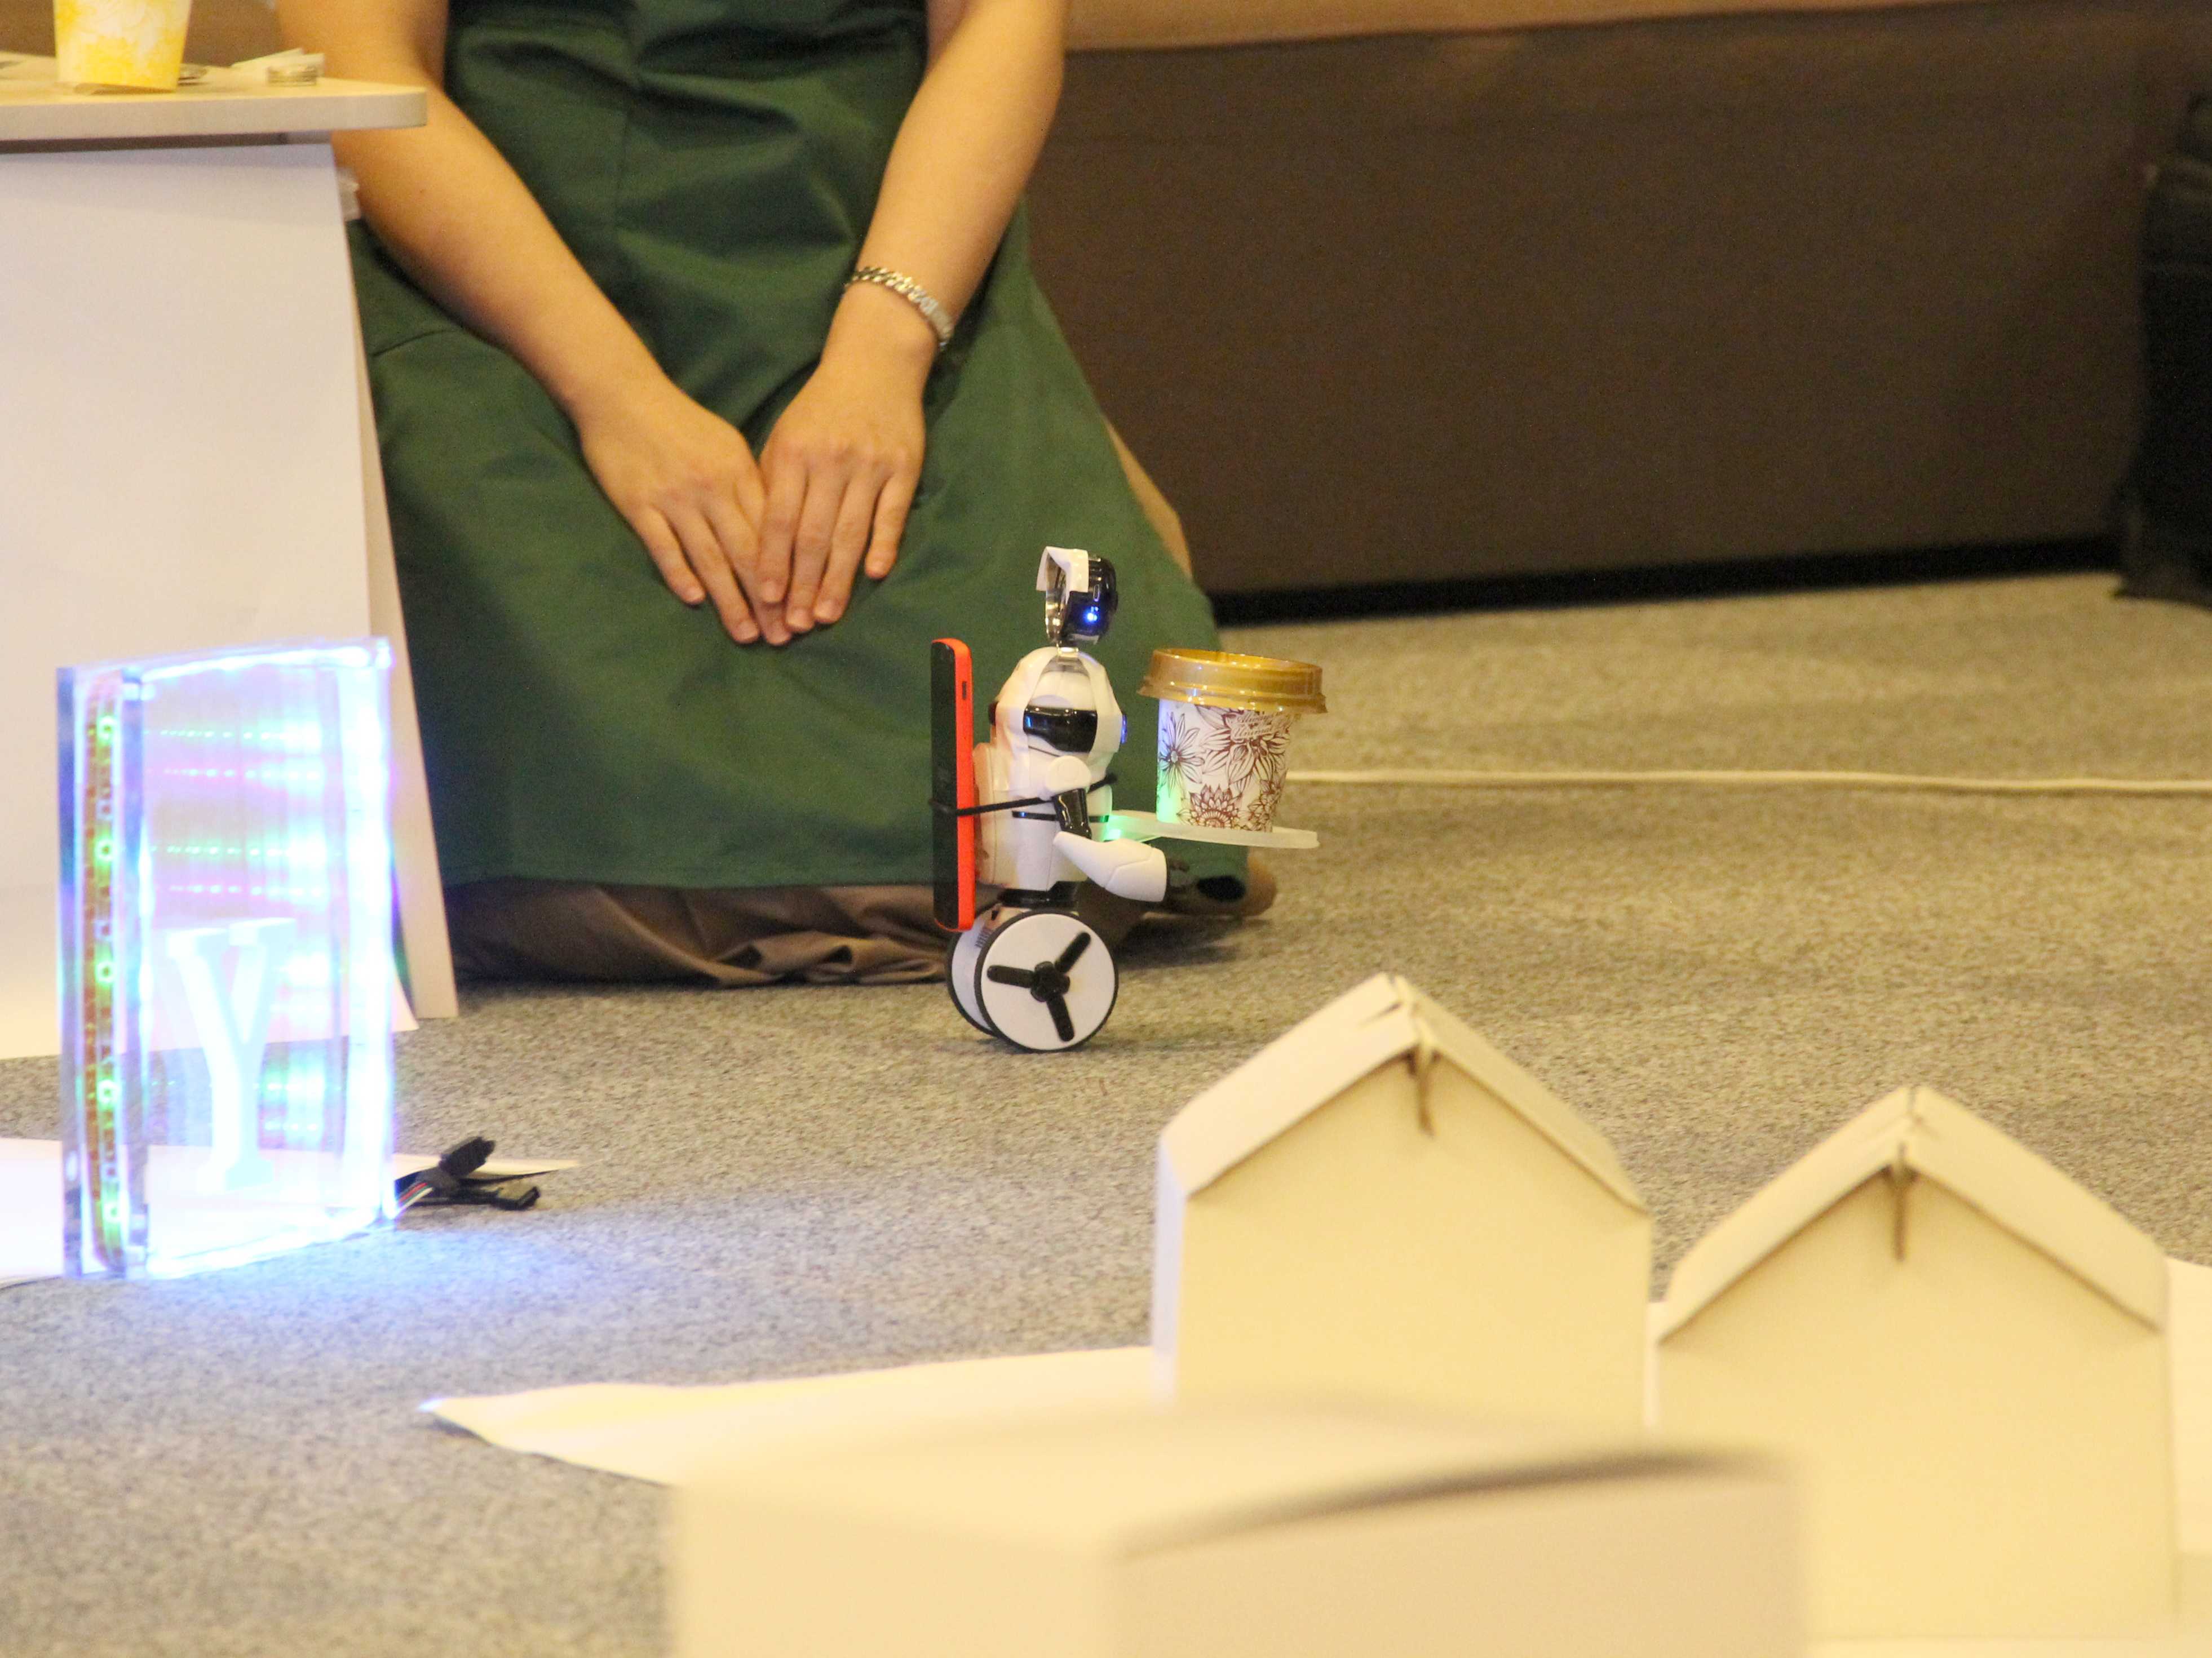 A small robot holding a paper cup